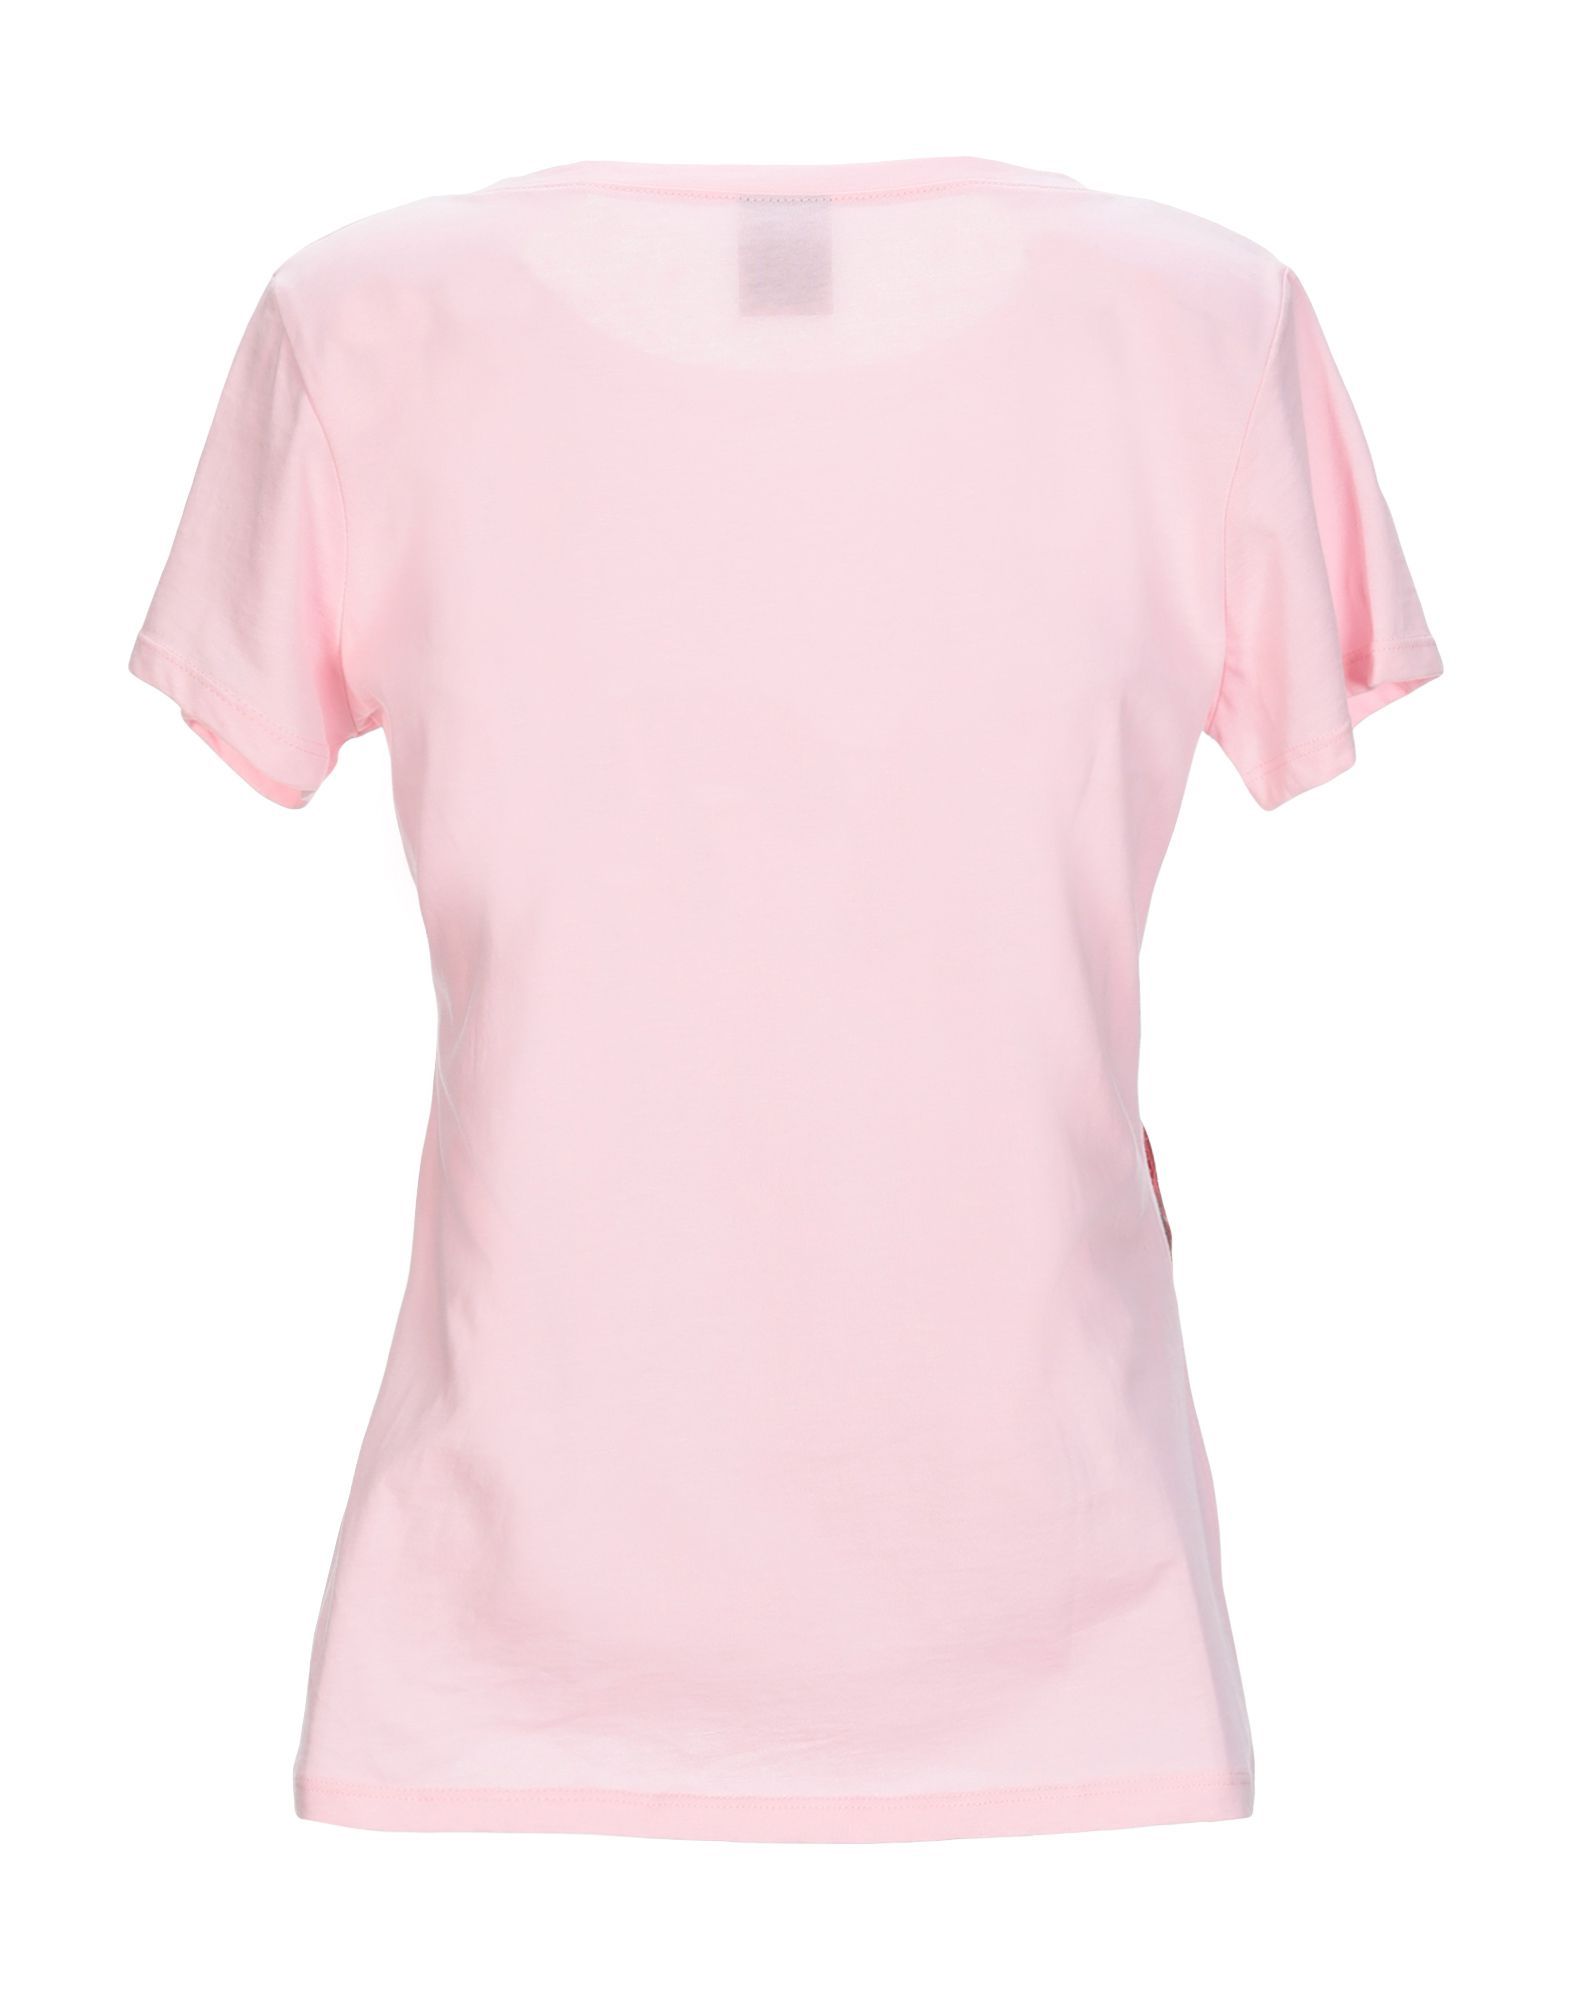 jersey, contrasting applications, solid colour, round collar, short sleeves, no pockets